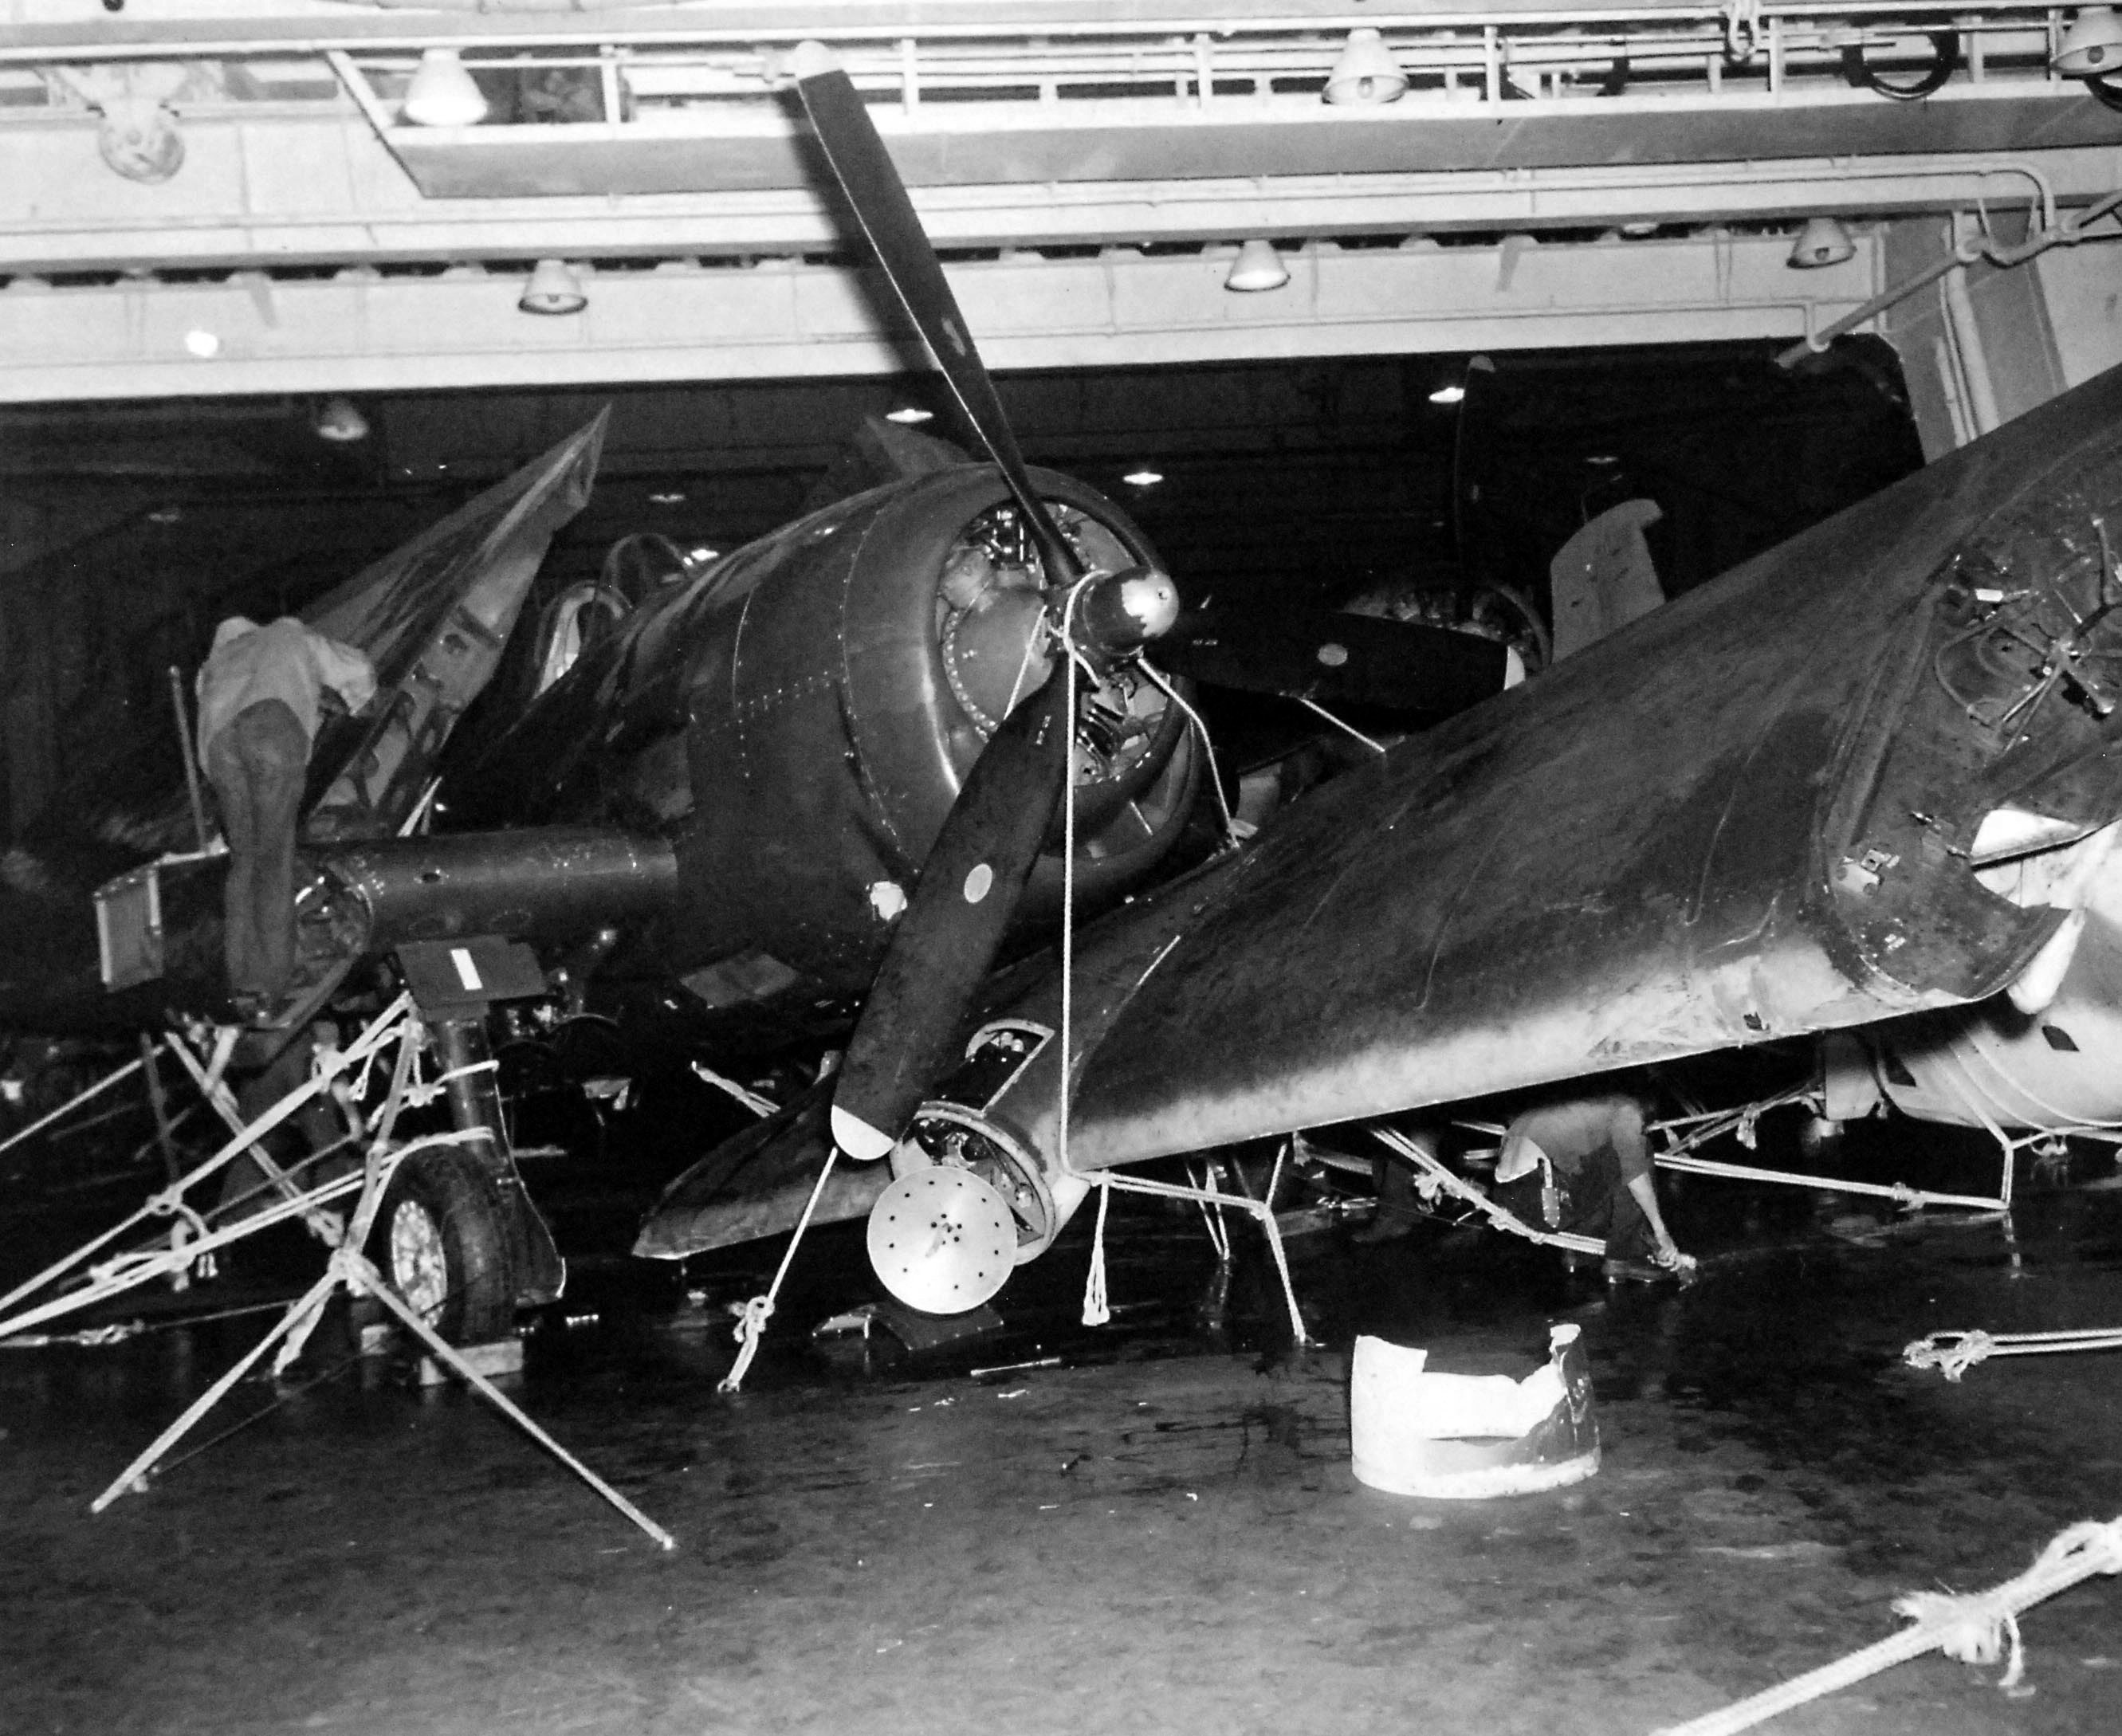 Damaged aircraft on the hangar deck of the USS Independence, 6 Oct 1944 following heavy seas 3 days earlier. Note the hand-tied rope lashings to secure the aircraft. Note also the AIA radar antenna in the damaged radome